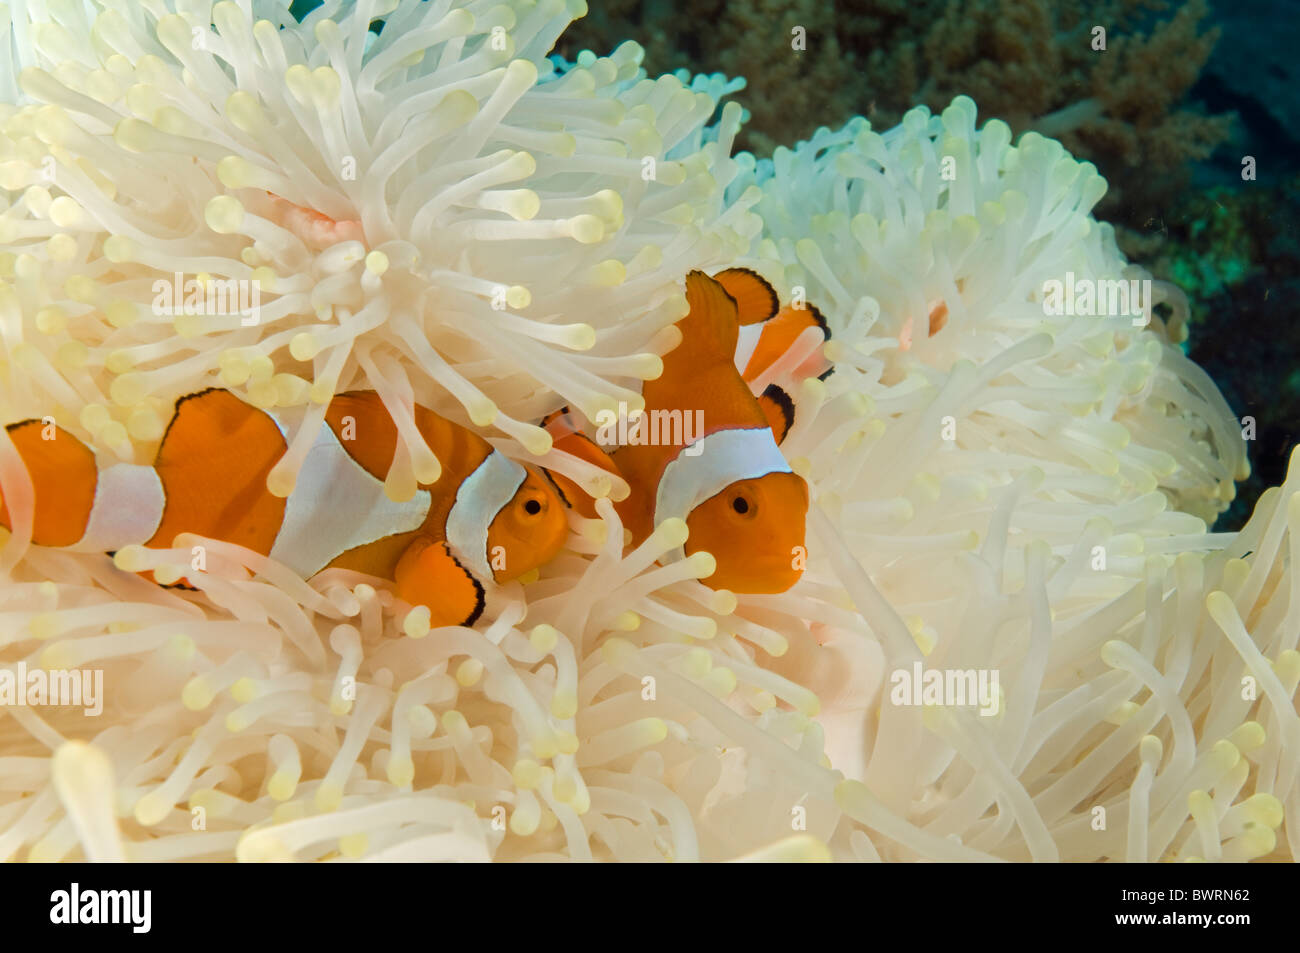 Clownfishes, Amphiprion ocellaris, in a bleached anemone Raja Ampat Indonesia Stock Photo